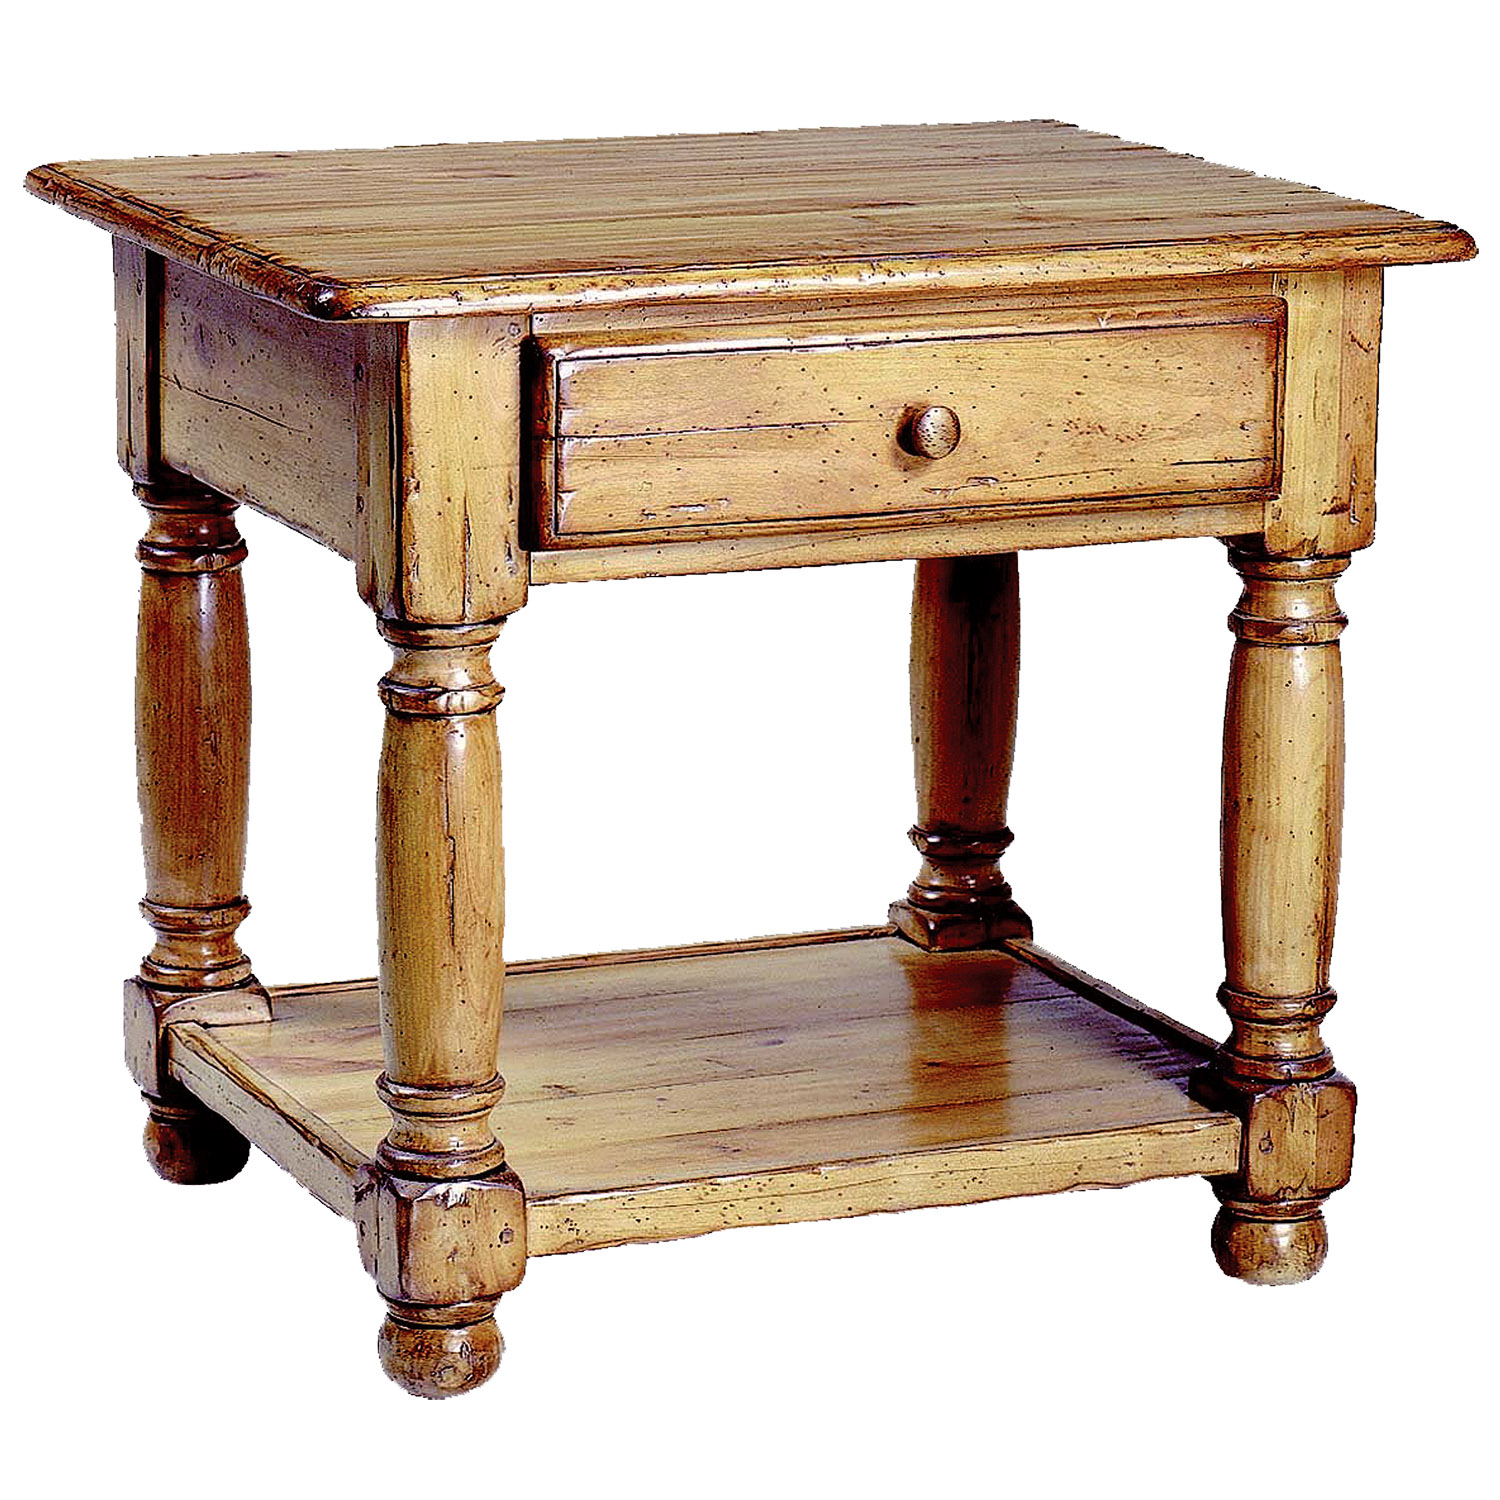 thurman traditional stained distressed side or end table with one shelf and one drawer by Woodland furniture in Idaho Falls